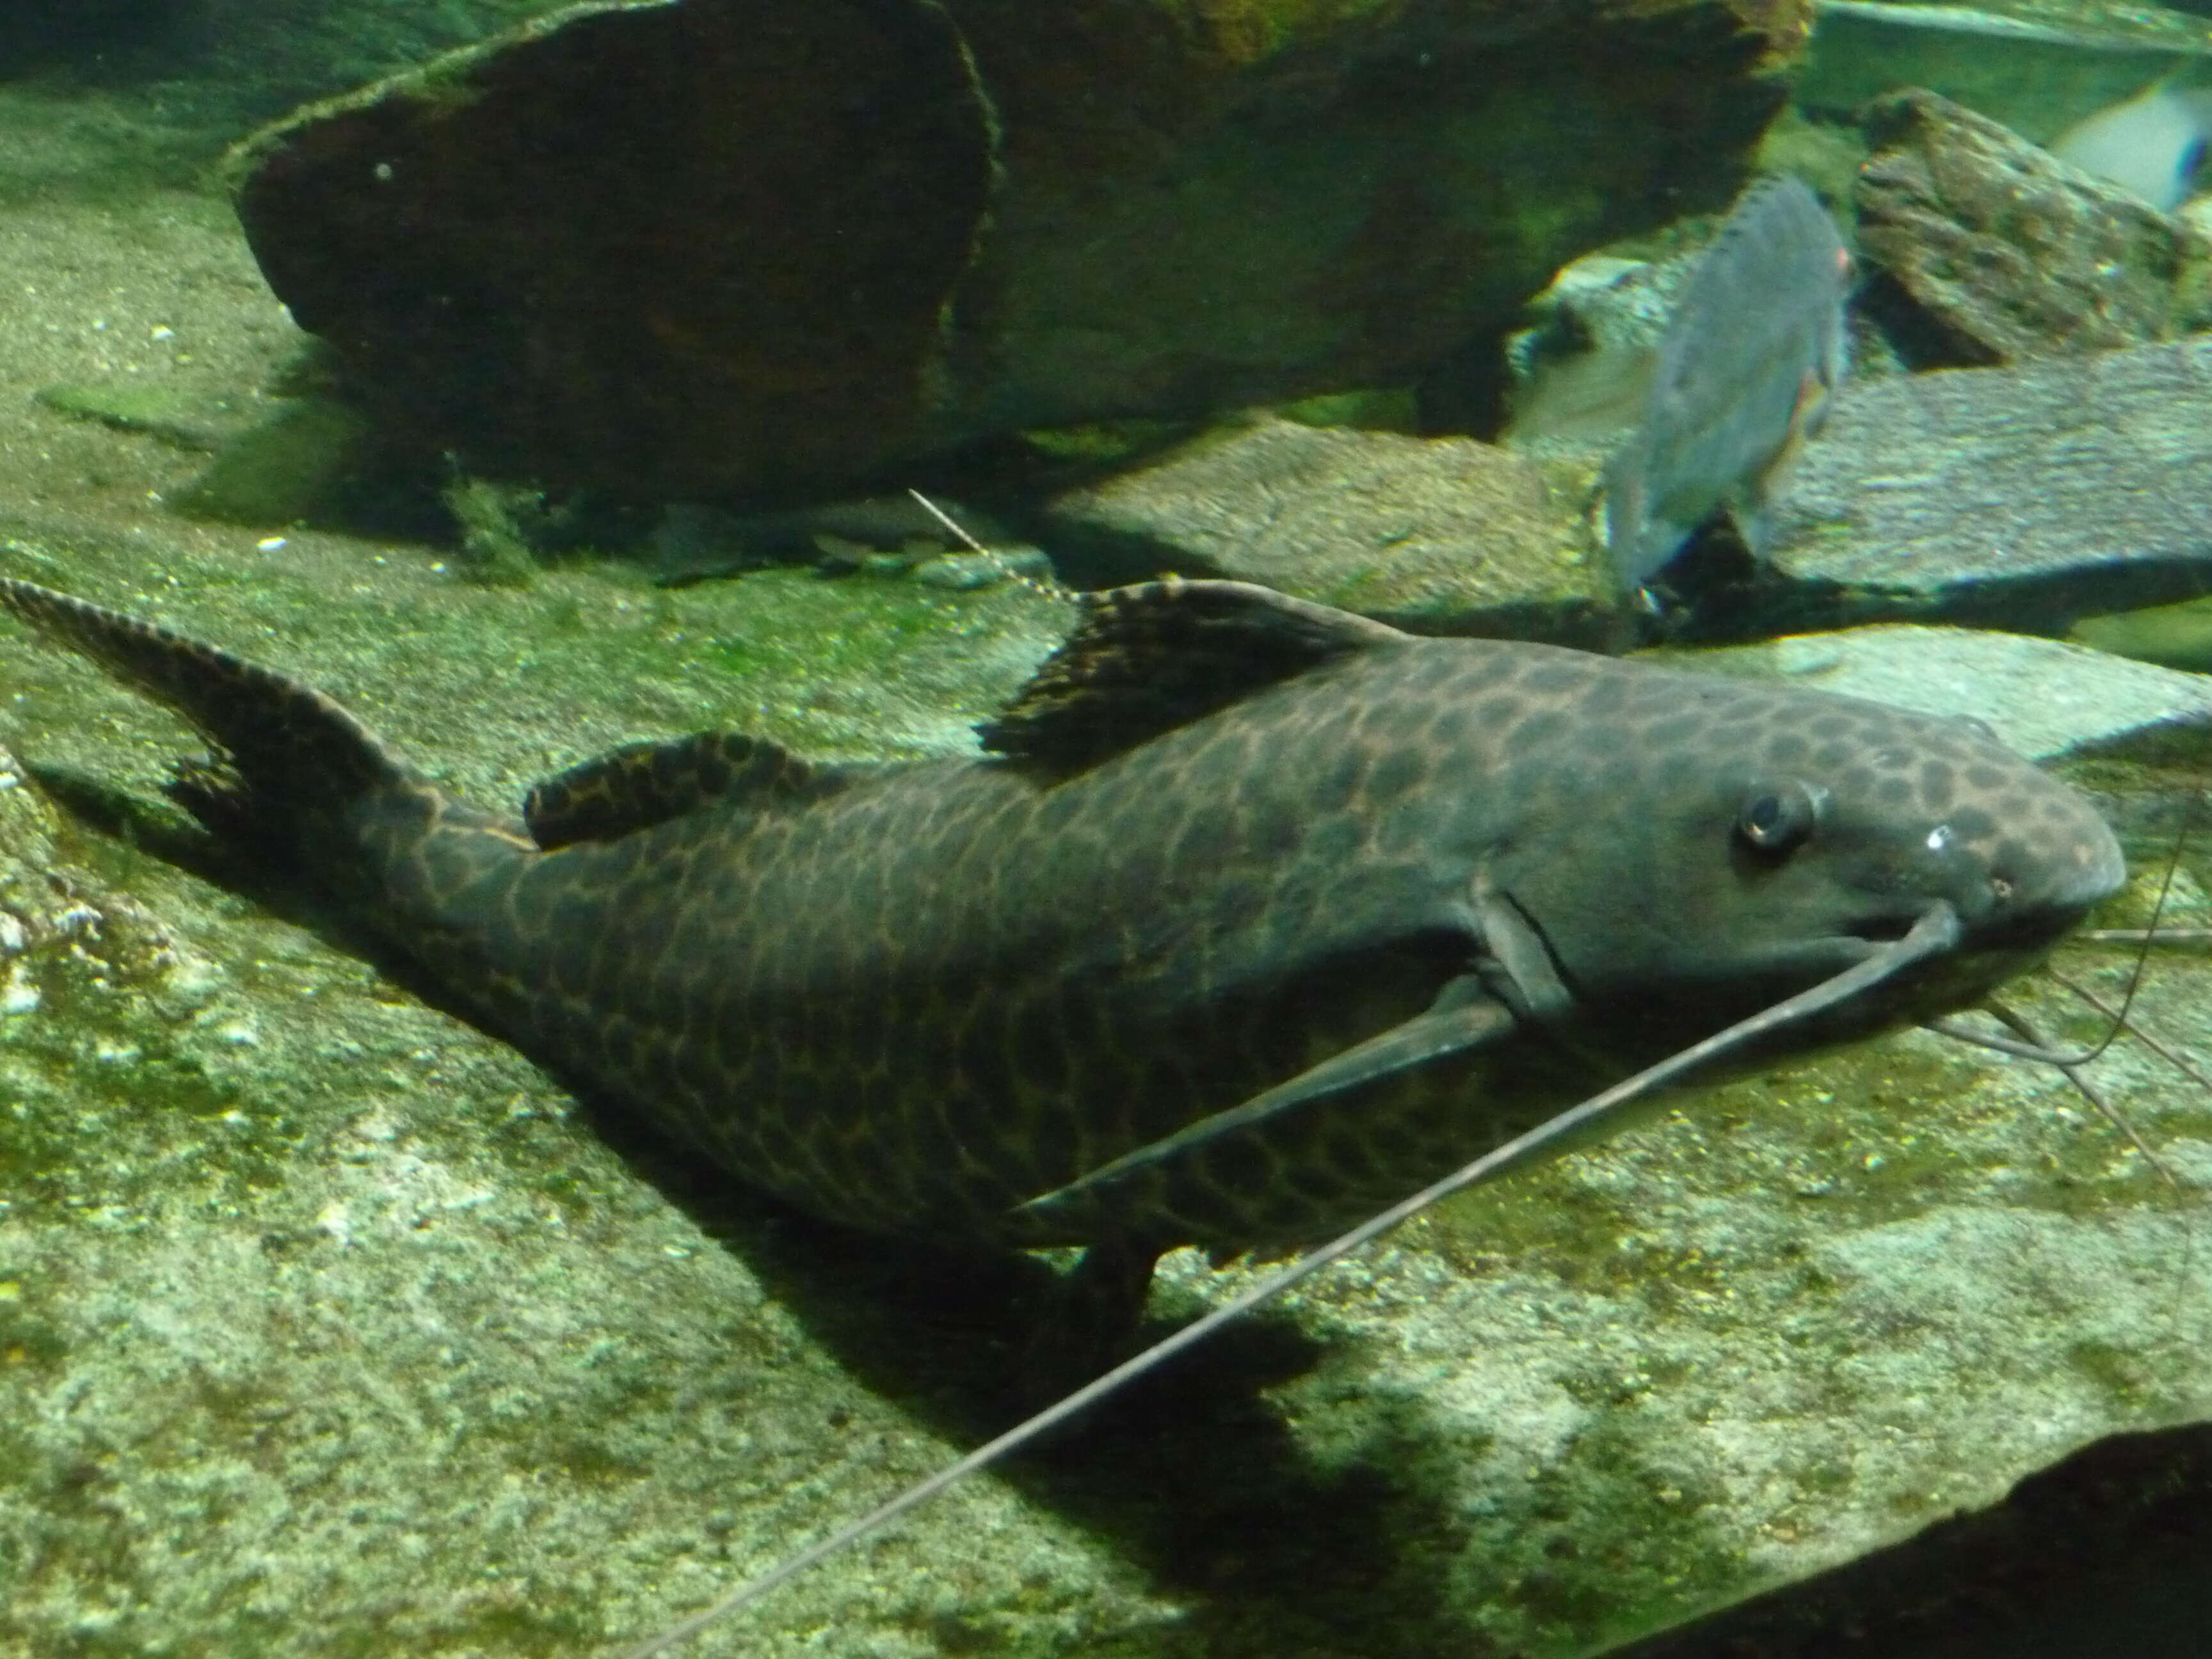 Image of Perrunichthys